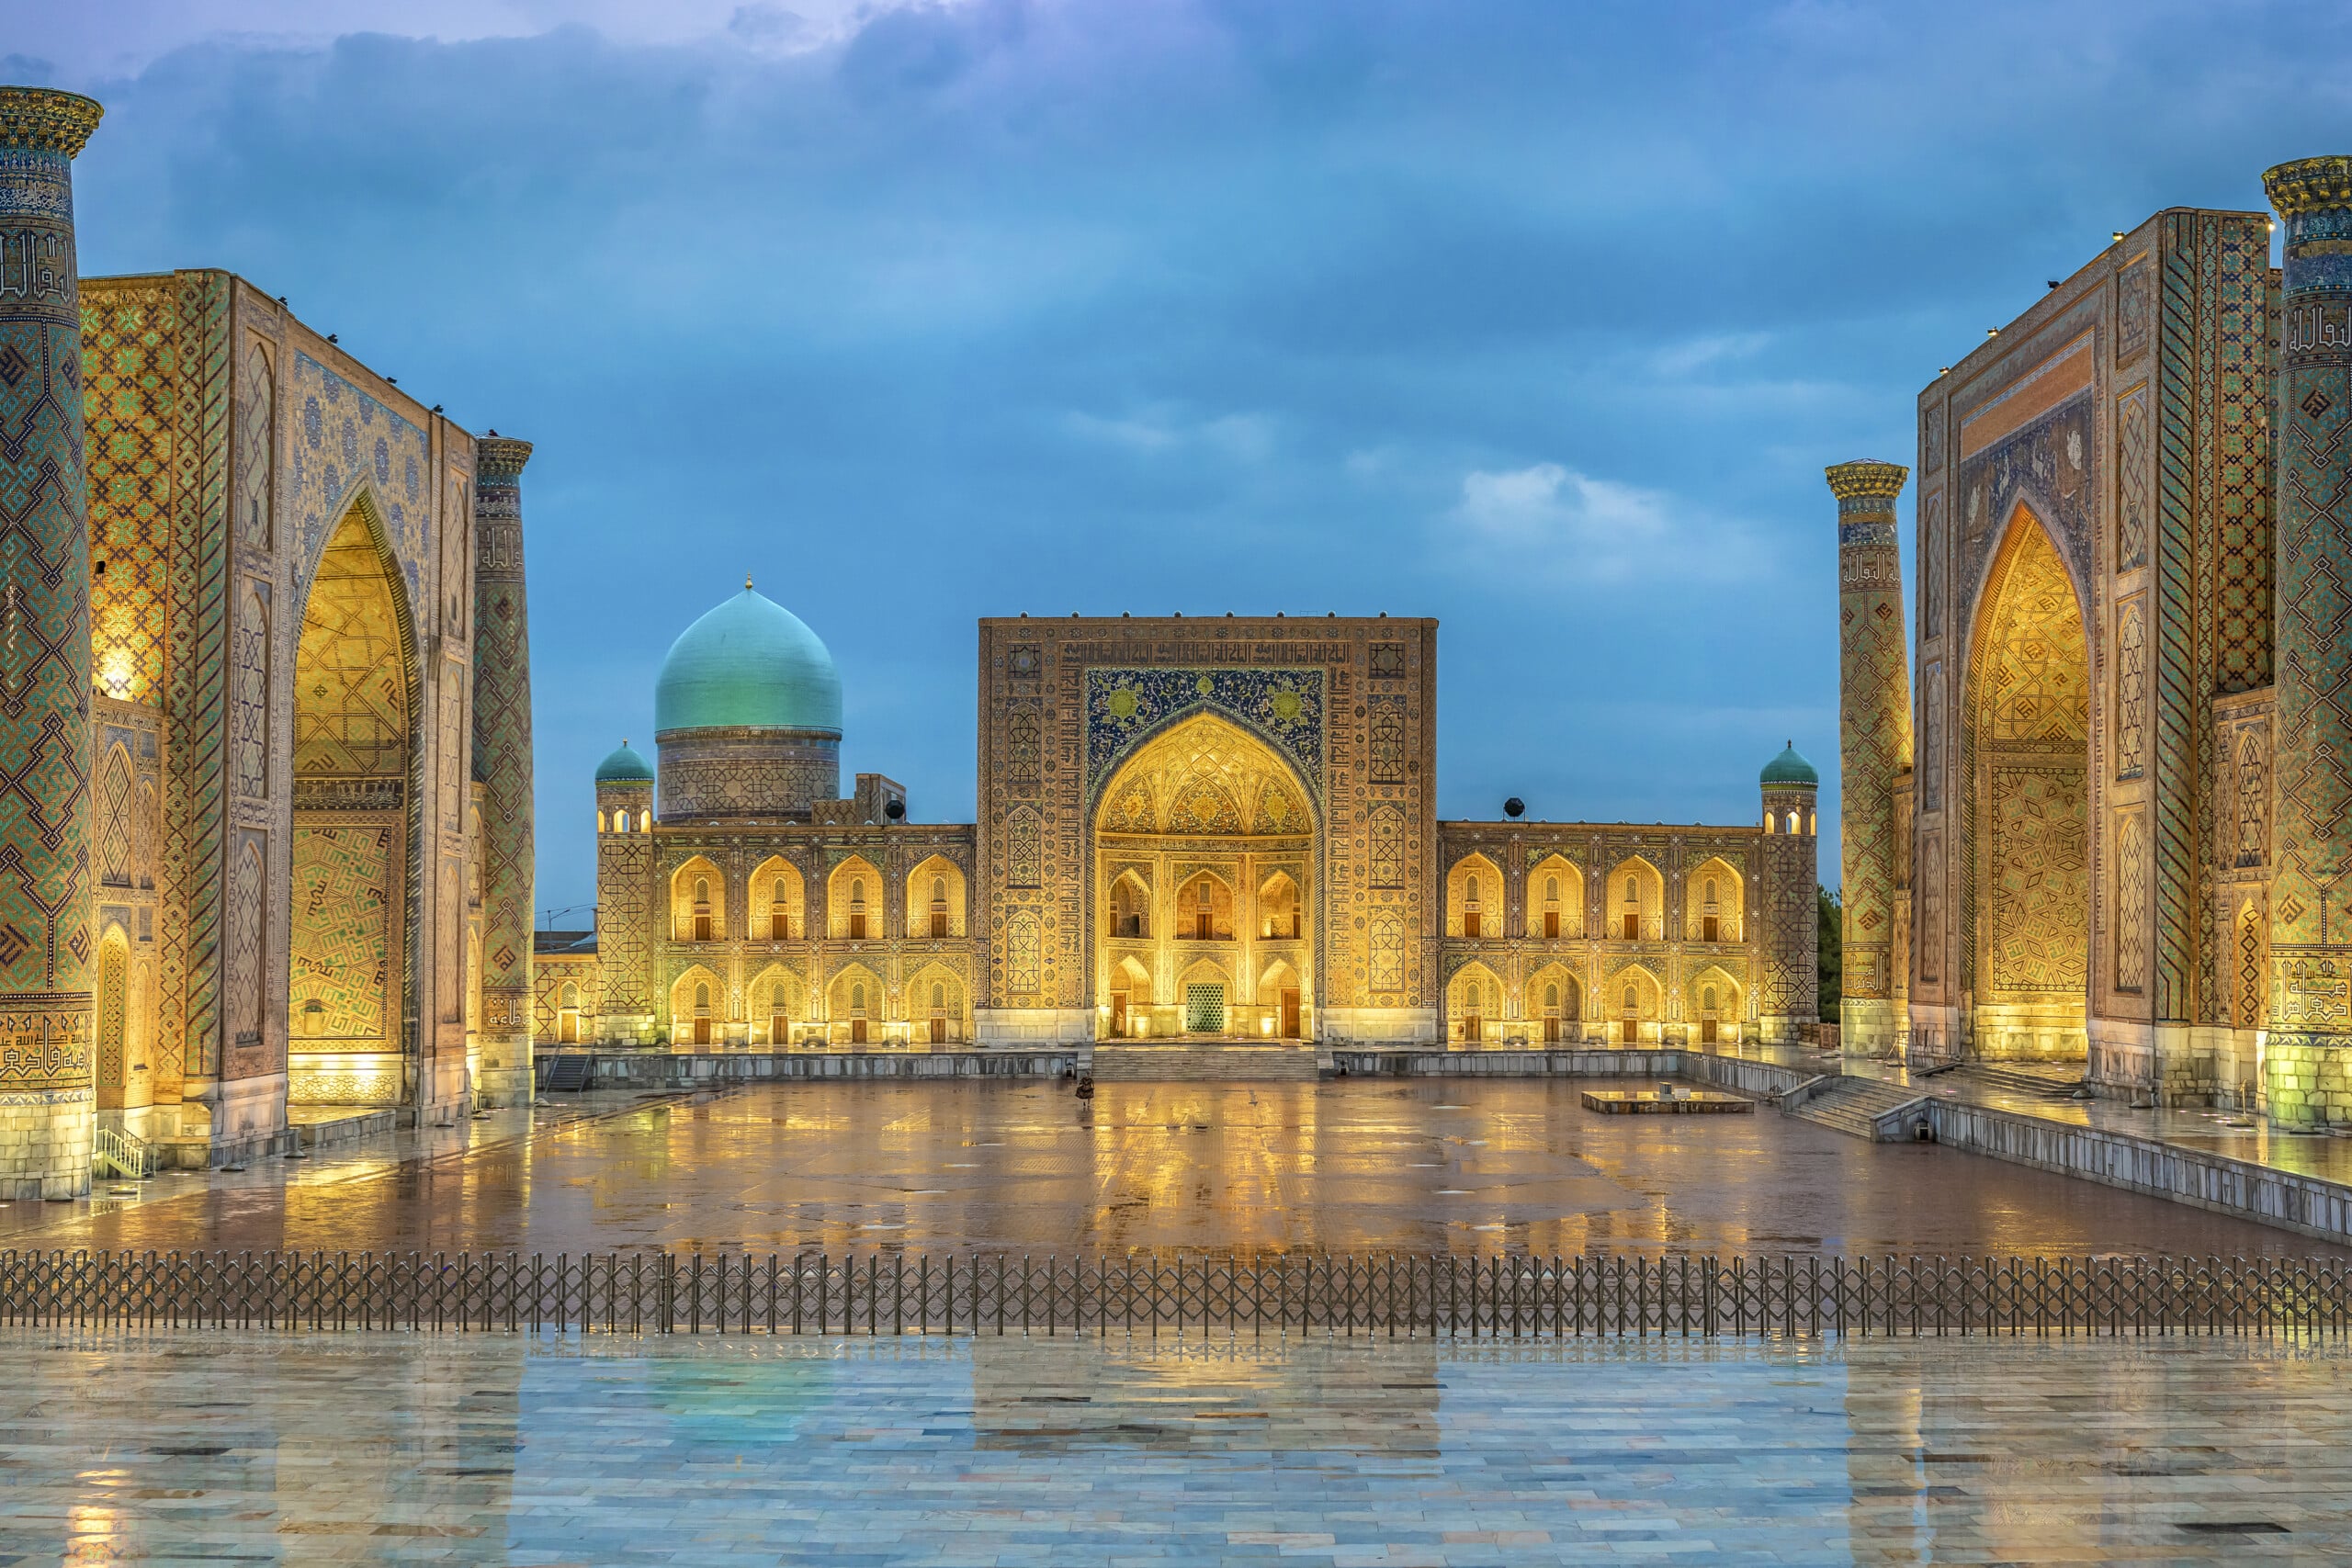 <p>Uzbekistan, once on the cusp of becoming a major travel destination, is now ready to shine with visa-free access for citizens of 86 countries. Its untouched landscapes and well-preserved architecture await eager visitors, while cities like Samarkand, Bukhara, and Khiva offer insights into the historic Silk Road. UNESCO-listed Sentob village, recognized for sustainable development and eco-tourism, adds to Uzbekistan's allure. Traveling around the country is seamless thanks to the high-speed Afrosiyob Express train, connecting Tashkent with key cities. With its rich history, stunning scenery, and commitment to sustainability, Uzbekistan promises an unforgettable journey along the ancient Silk Road.</p>